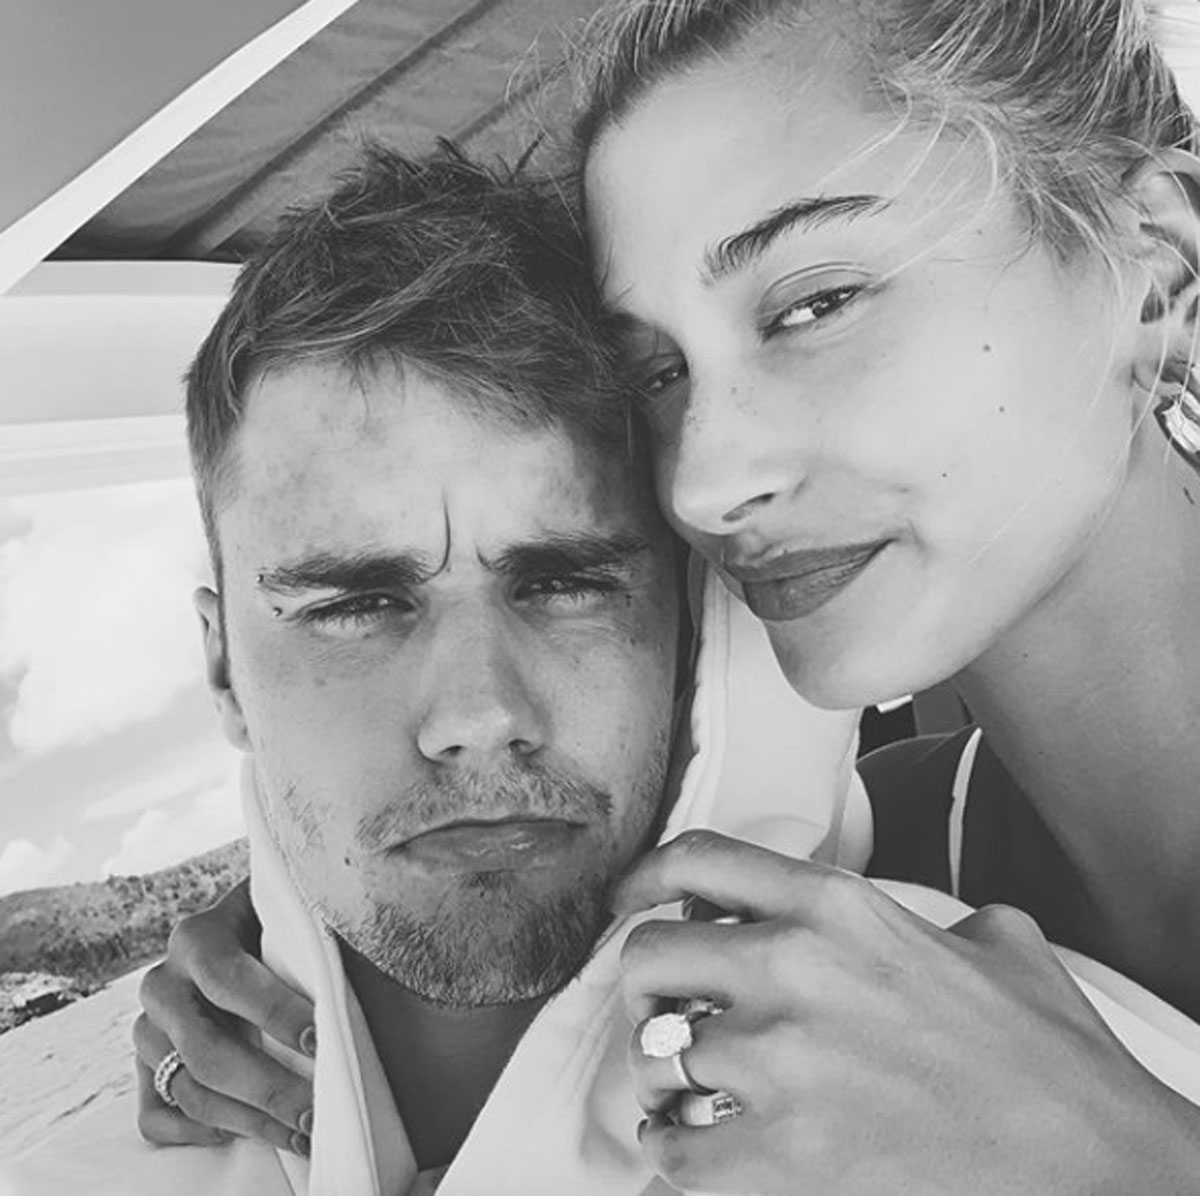 Hailey Bieber and Justin Bieber on vacation